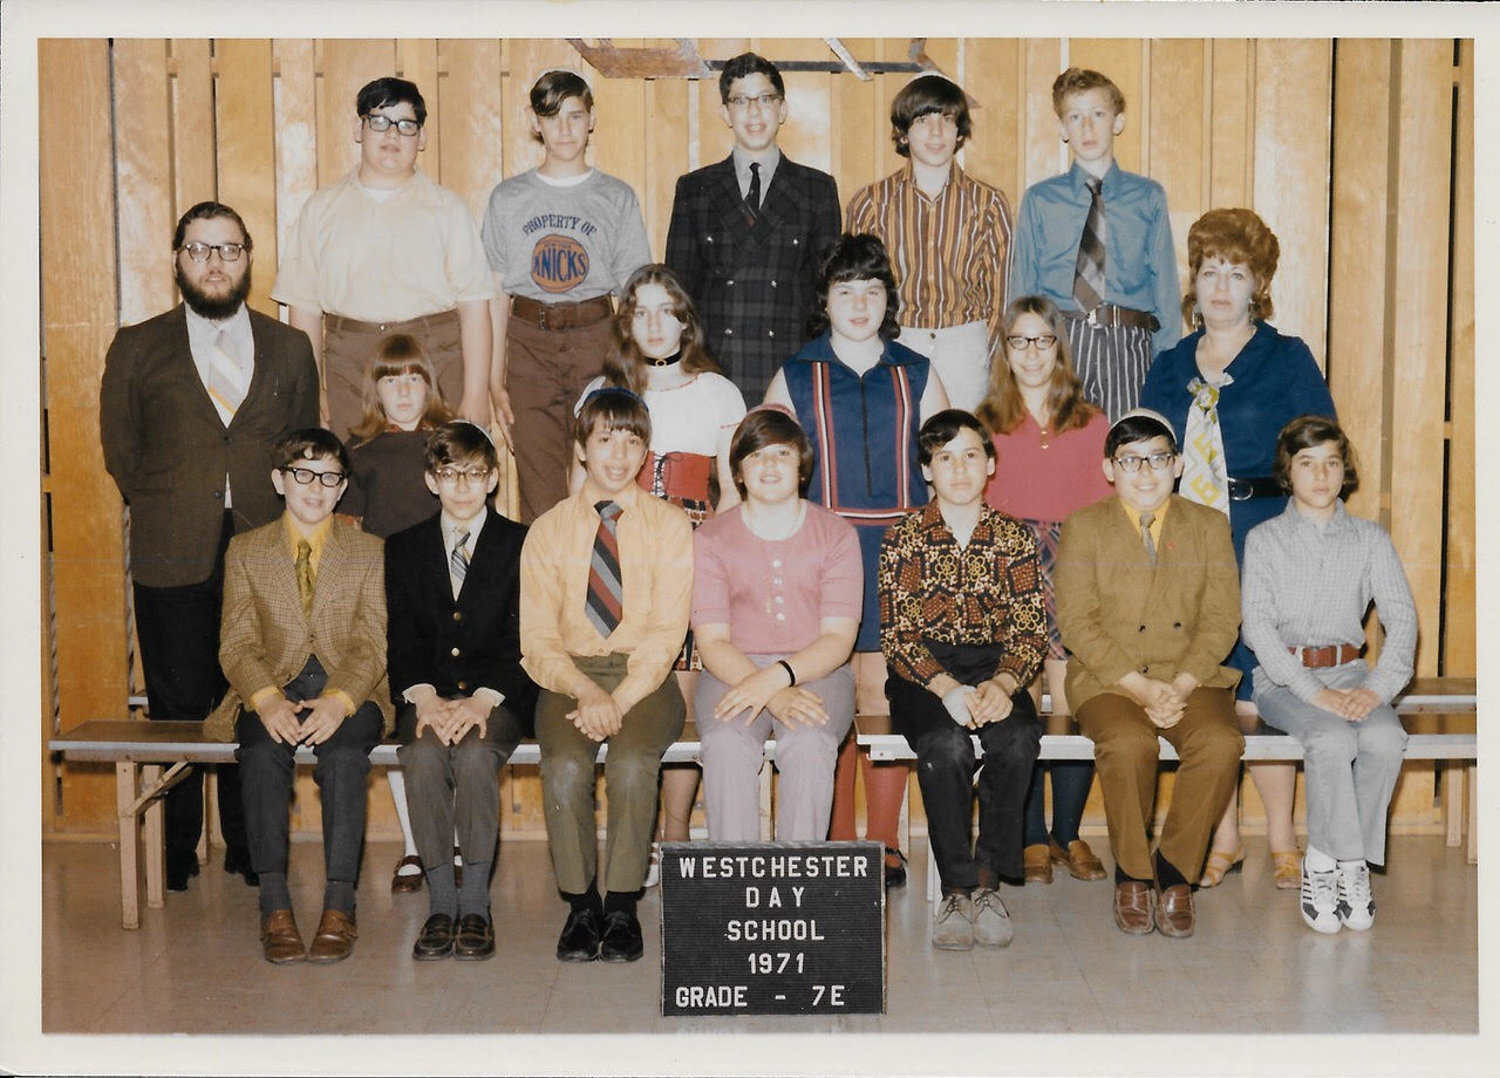 A 1971 photograph shows the seventh grade class at Westchester Day School where Michael Rabin, second from right in the top row, was a student. Rabin sought help from teachers and administrators after his claims he was molested by Stanley Rosenfeld, a teacher at the school who also taught at Salanter Akiba Riverdale Academy. Rosenfeld pleaded no contest to two counts of second-degree child molestation in 2001. Since the passage of the Child Victims Act, three people have filed civil suits against SAR.